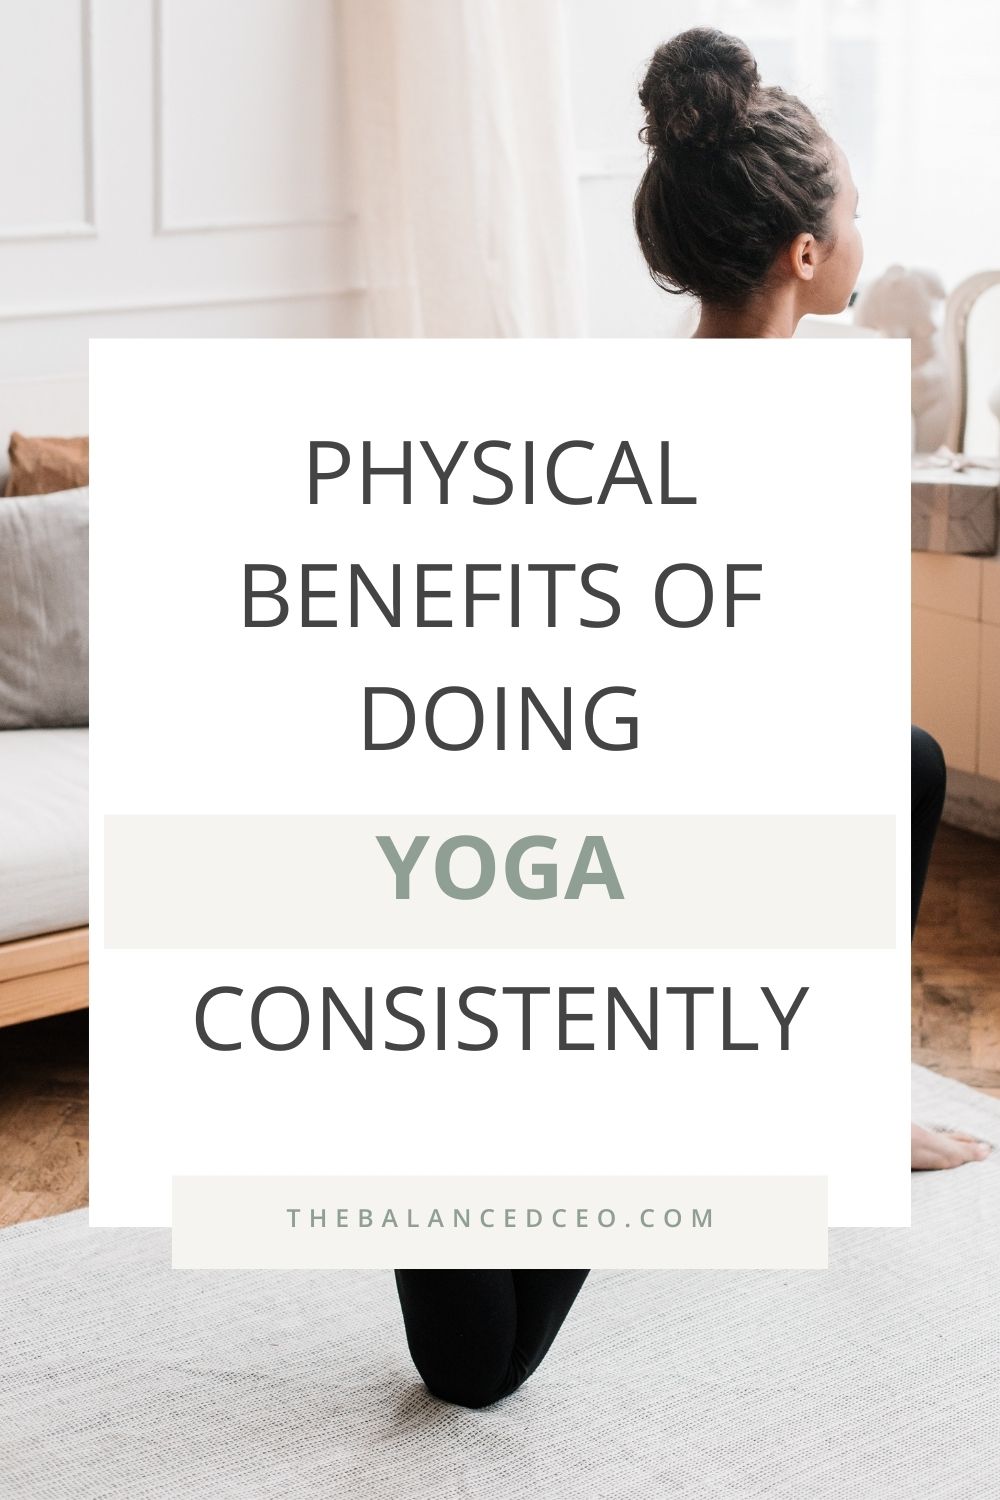 Physical Benefits of Doing Yoga